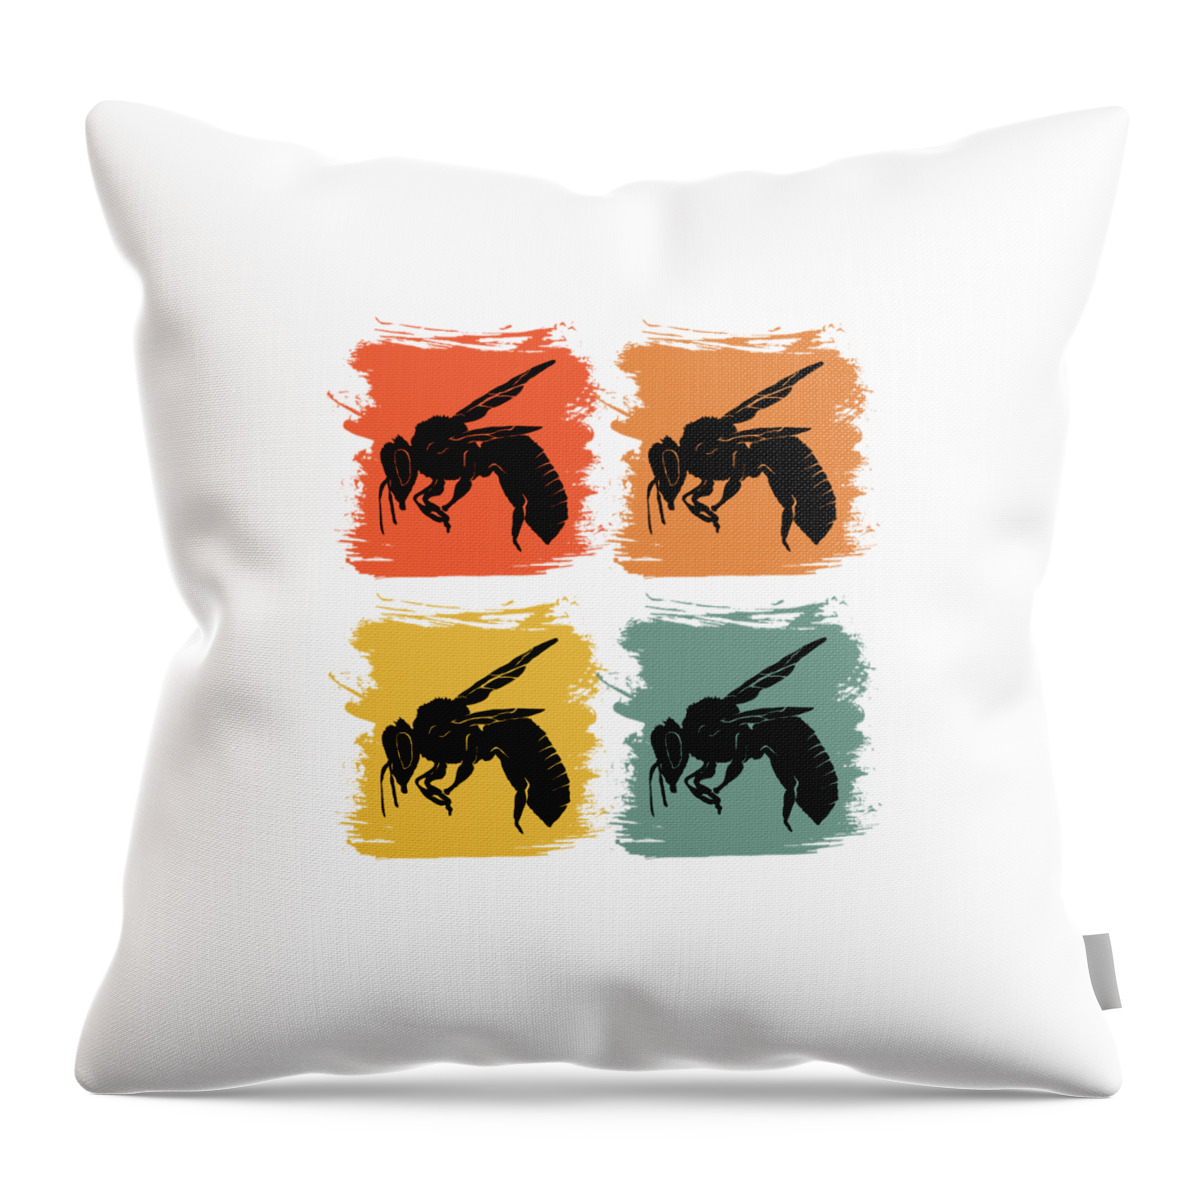 Bee Throw Pillow featuring the digital art Bee Wasp Retro Pop Art Gift Idea by J M